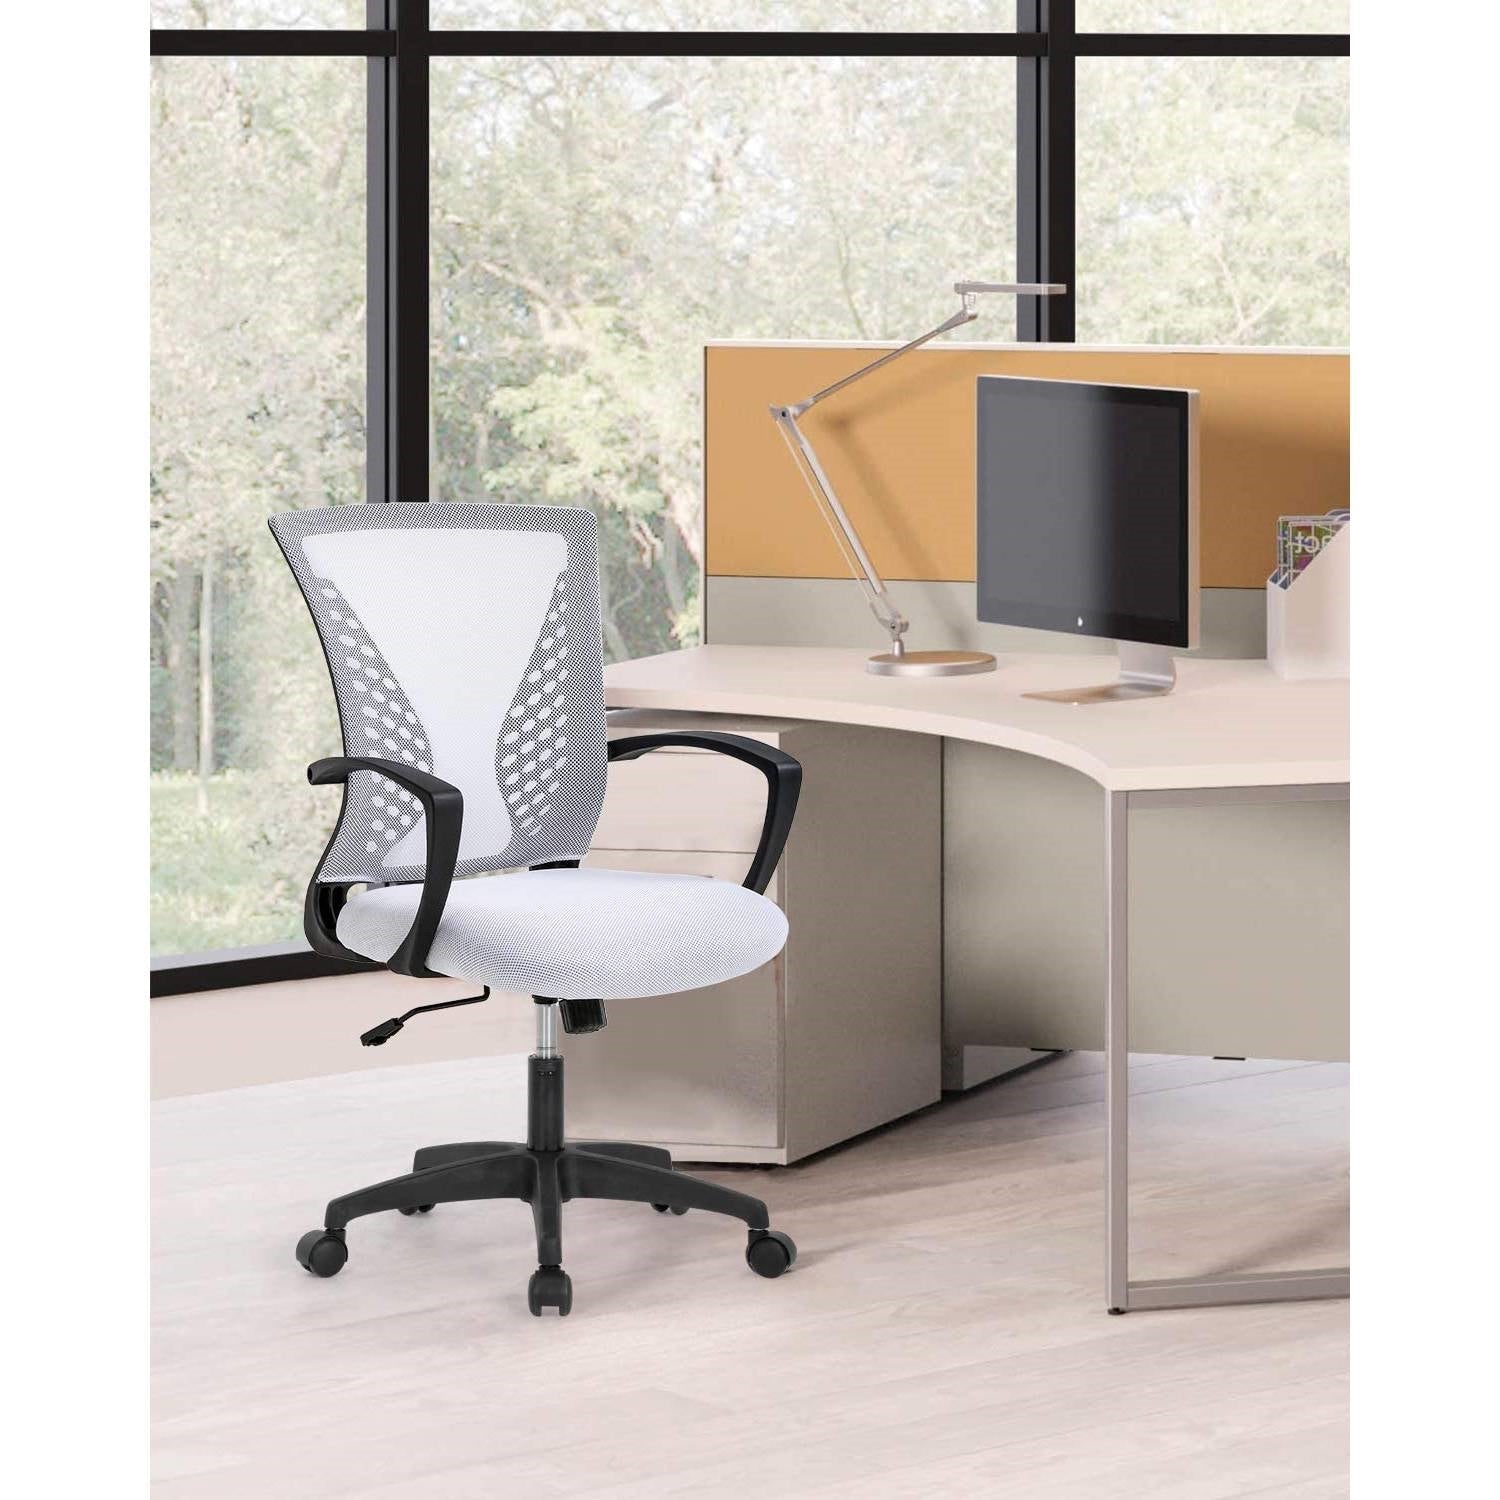 Office > Office Chairs - White Modern Mid-Back Office Desk Chair Ergonomic Mesh With Armrest On Wheels